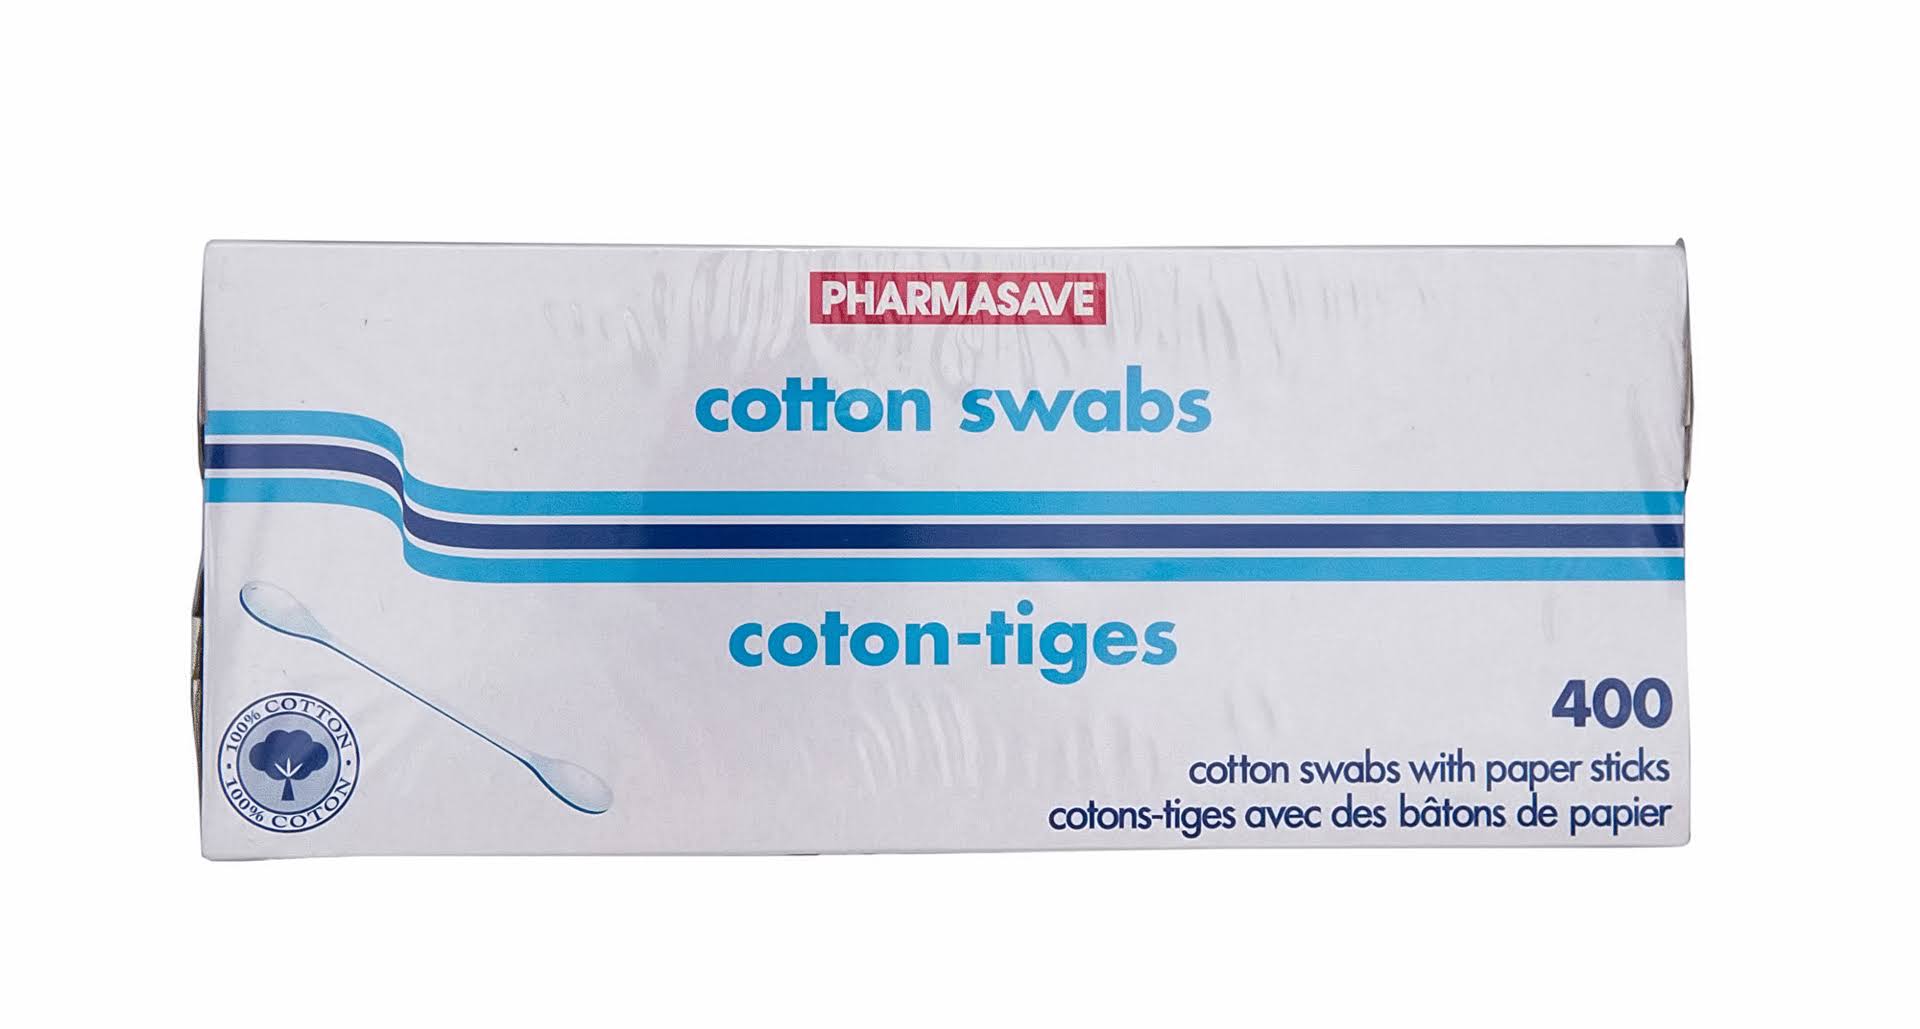 PHARMASAVE COTTON SWABS 400S